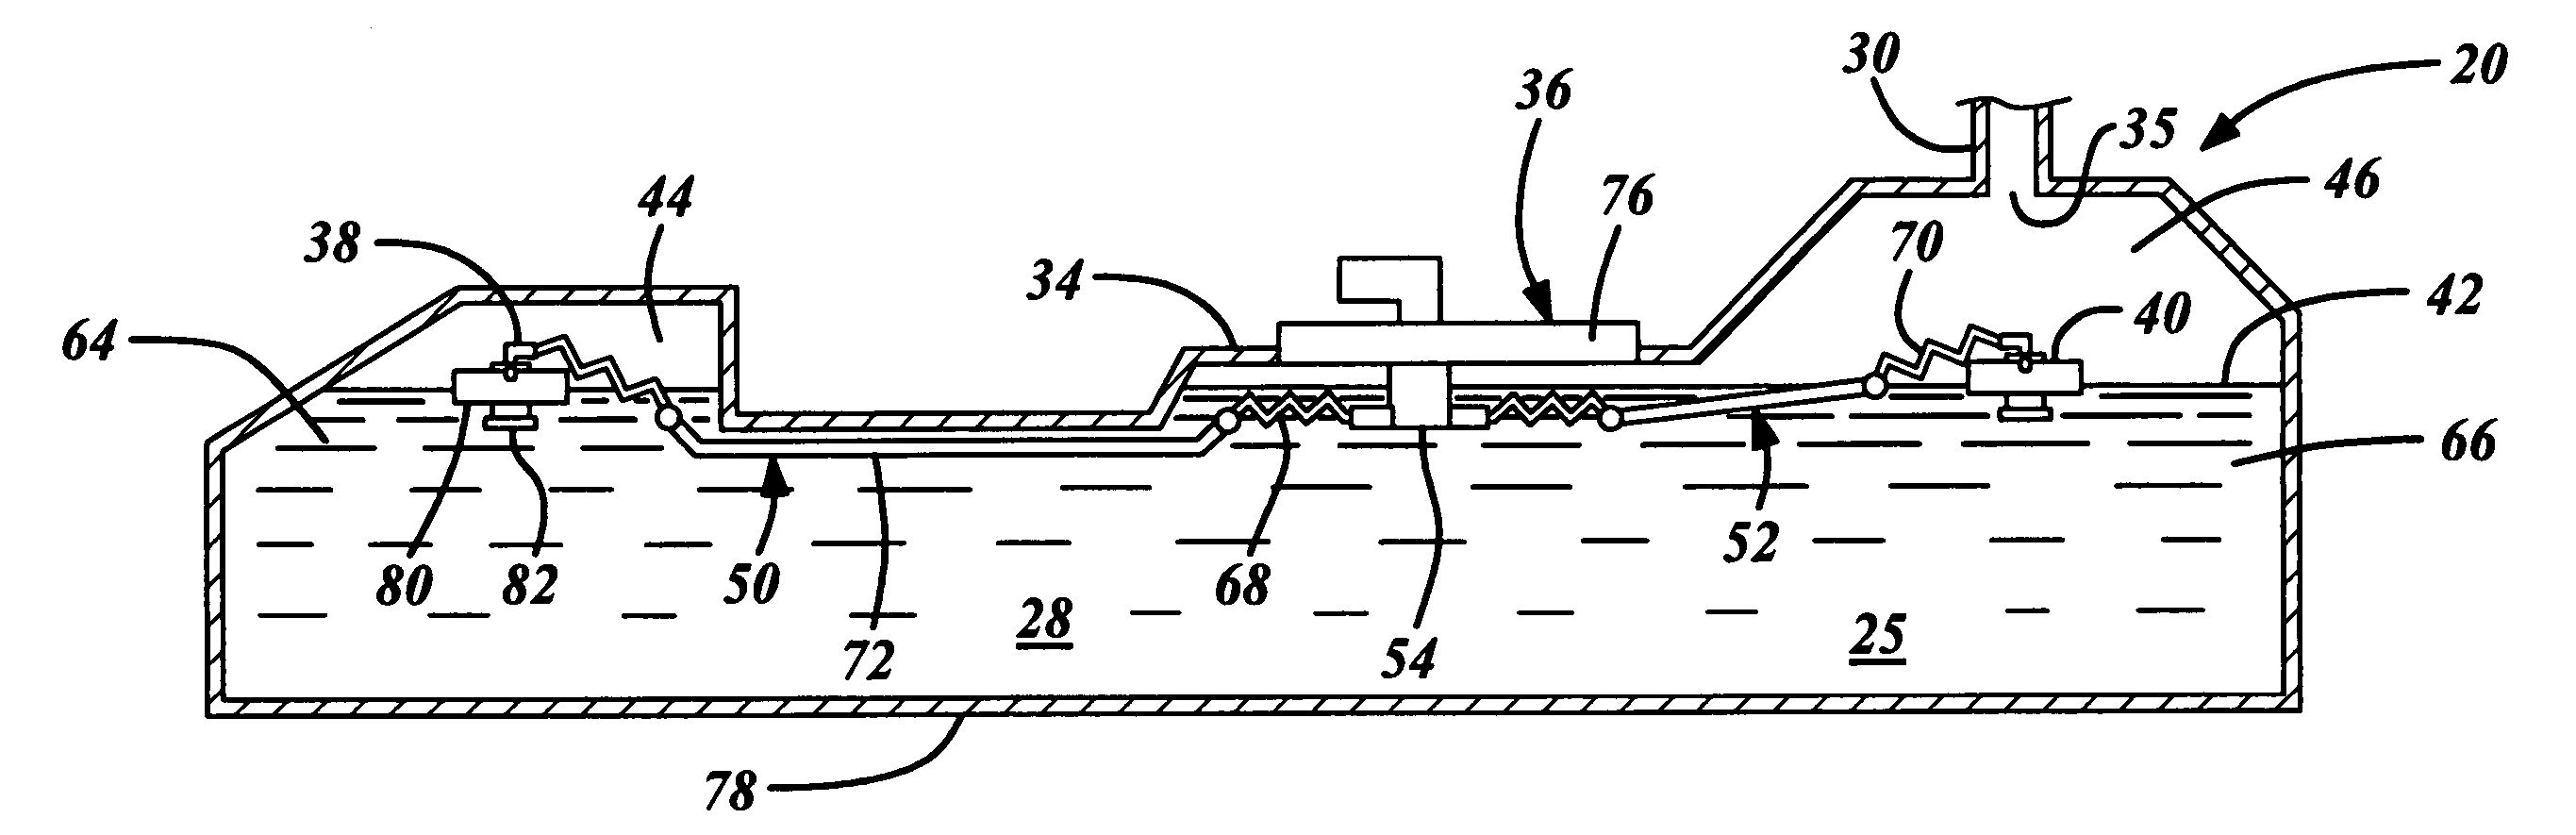 Fuel storage system for a vehicle